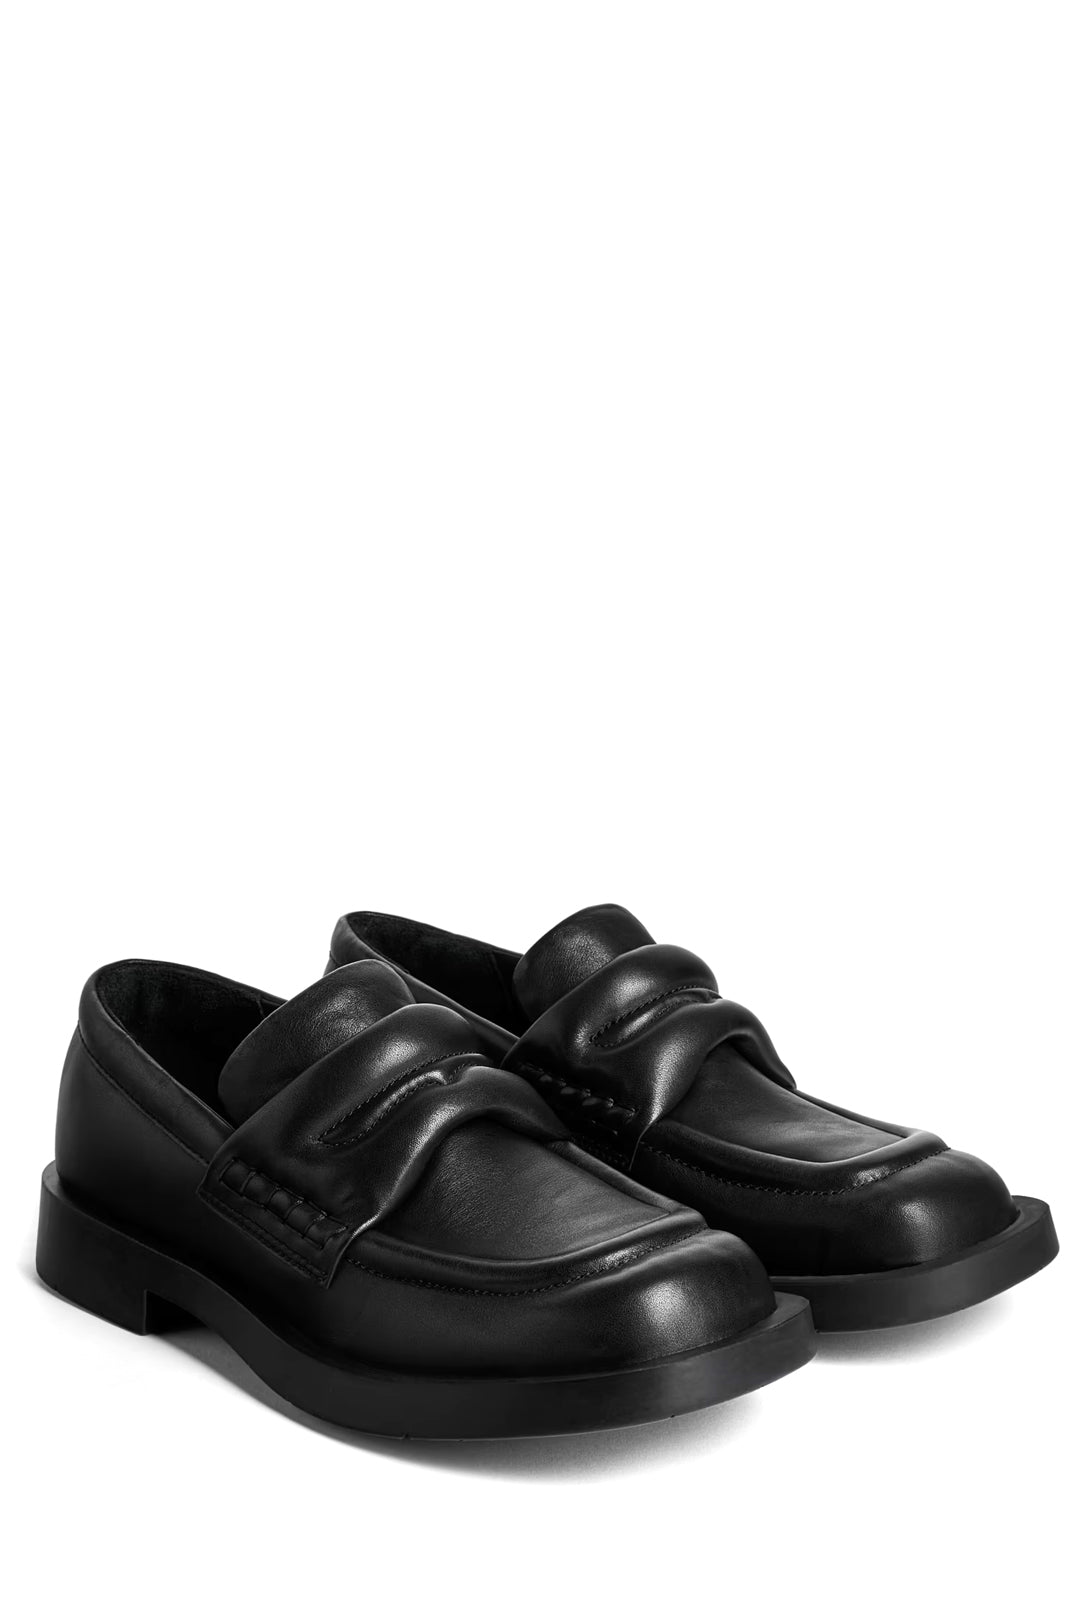 CamperLab MIL 1978 Puffy Loafers, Black - BACK IN STOCK!